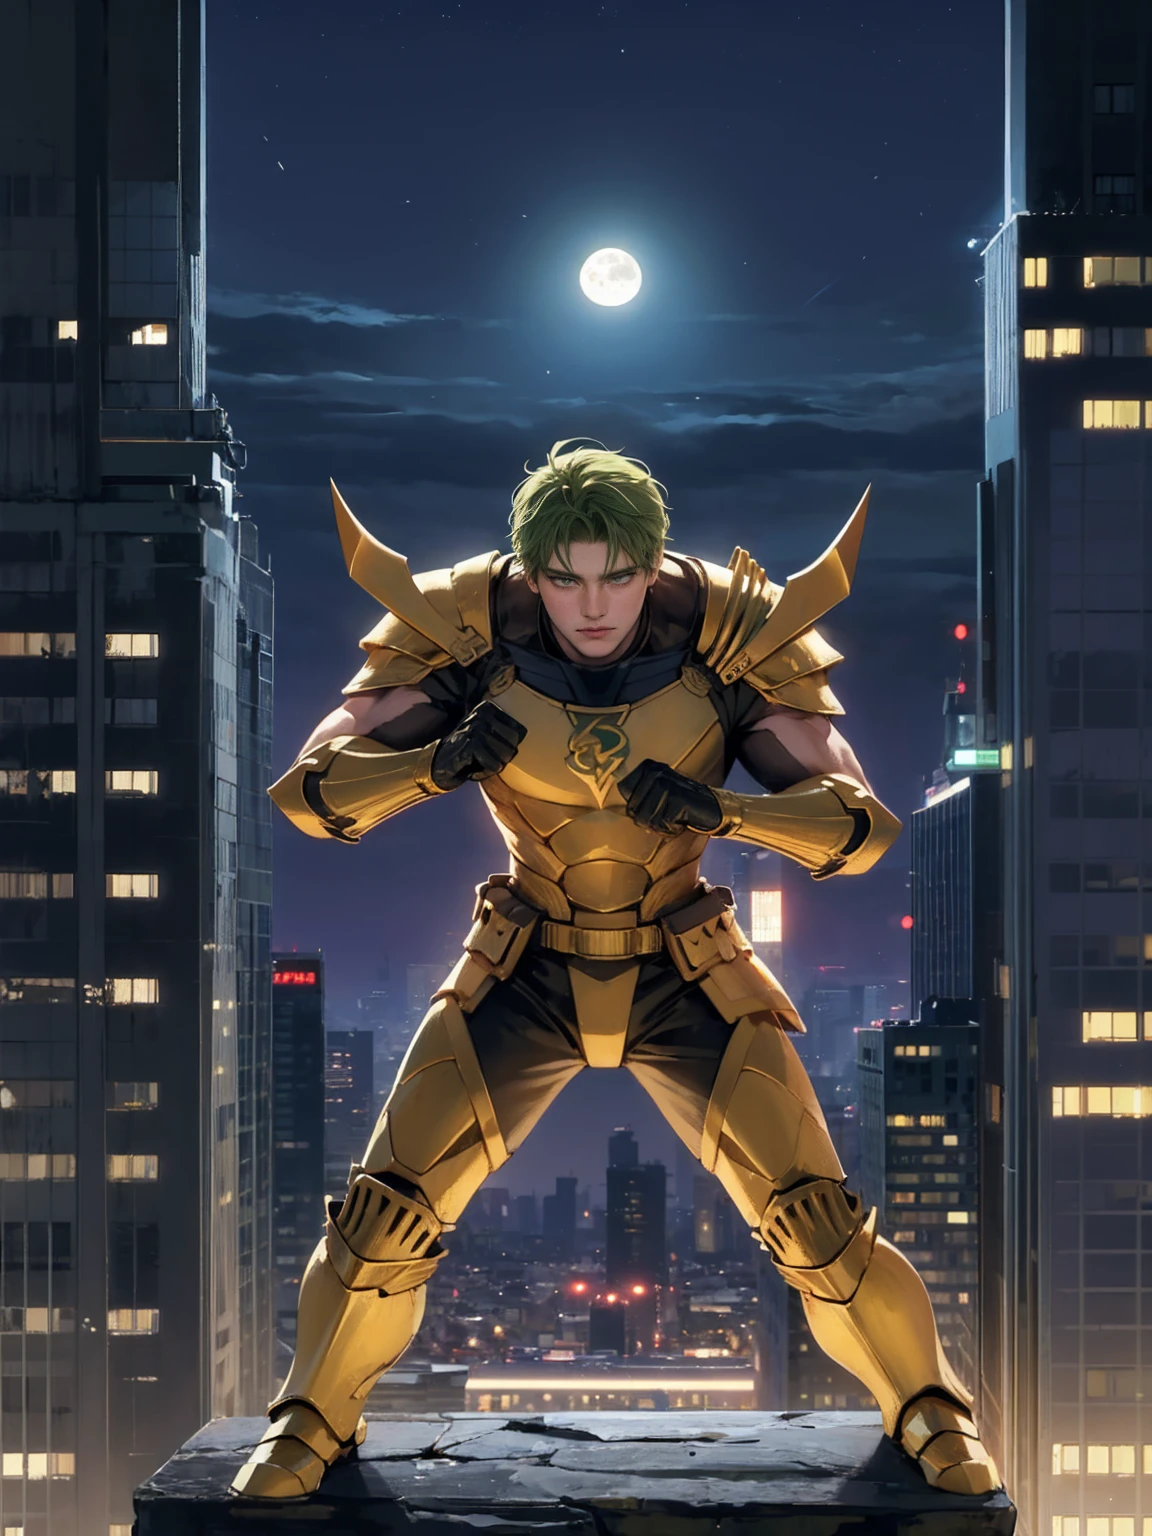 (masterpiece, 4K resolution, Surreal, Very detailed), (Zodiac Knight Theme, Charming, There was a boy at the top of the city, Sagittarius knight in golden armor, He's a superhero), [ ((20 years), (Green short hair:1.2), whole body, (Green Eyes:1.2), ((Fighting Stance),demonstration of strength), ((Sandy urban environment):0.8)| (city View, night, Dynamic Lighting), (Full Moon))